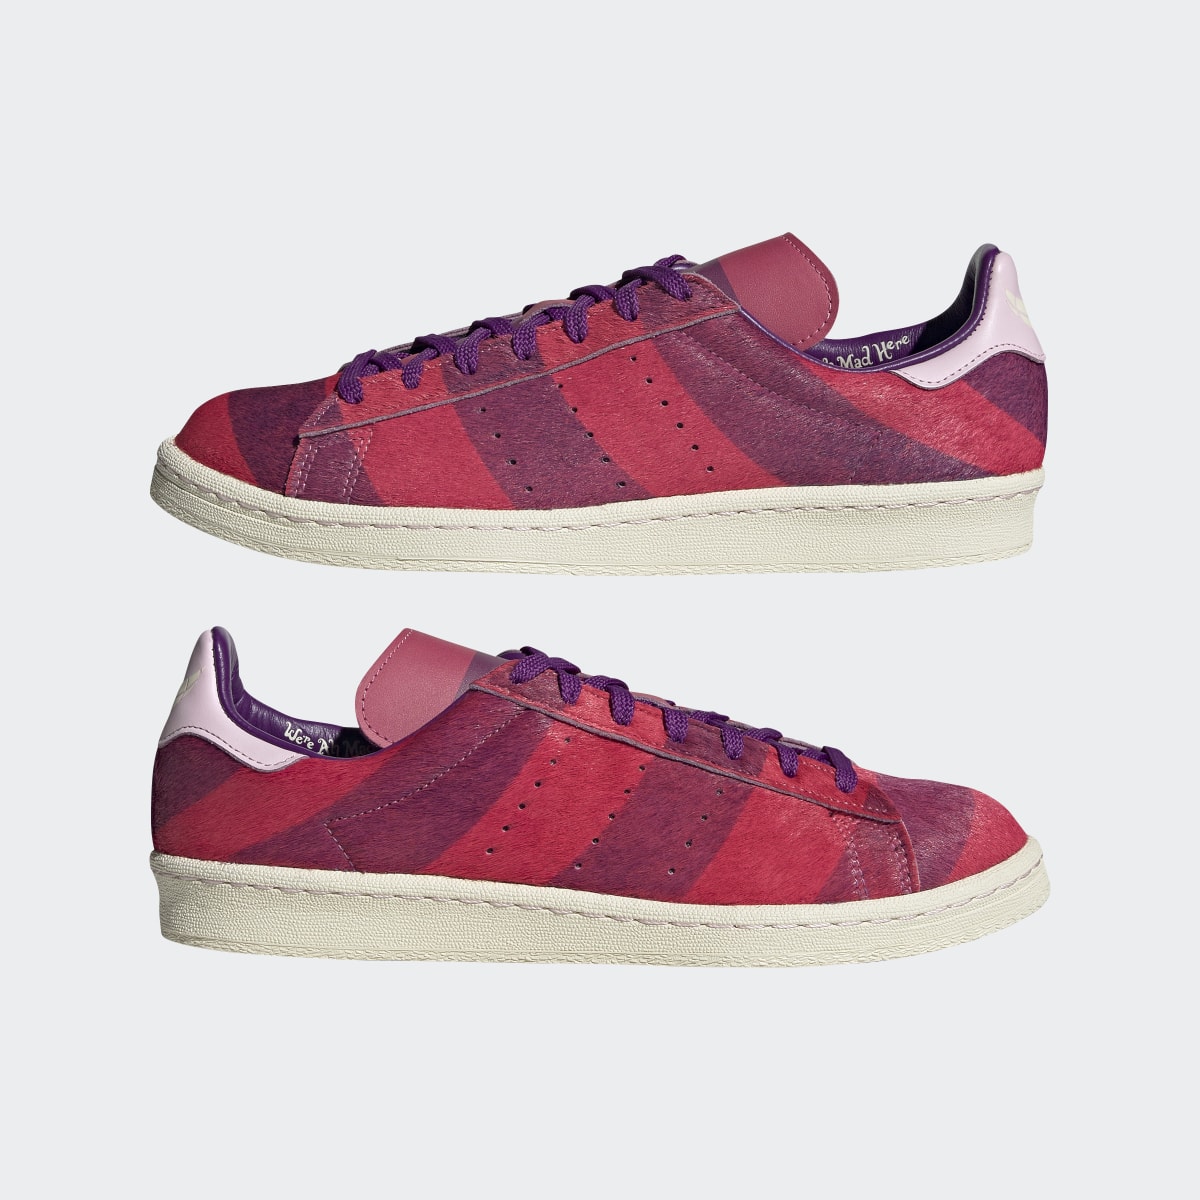 Adidas Campus 80s Cheshire Cat Shoes. 10